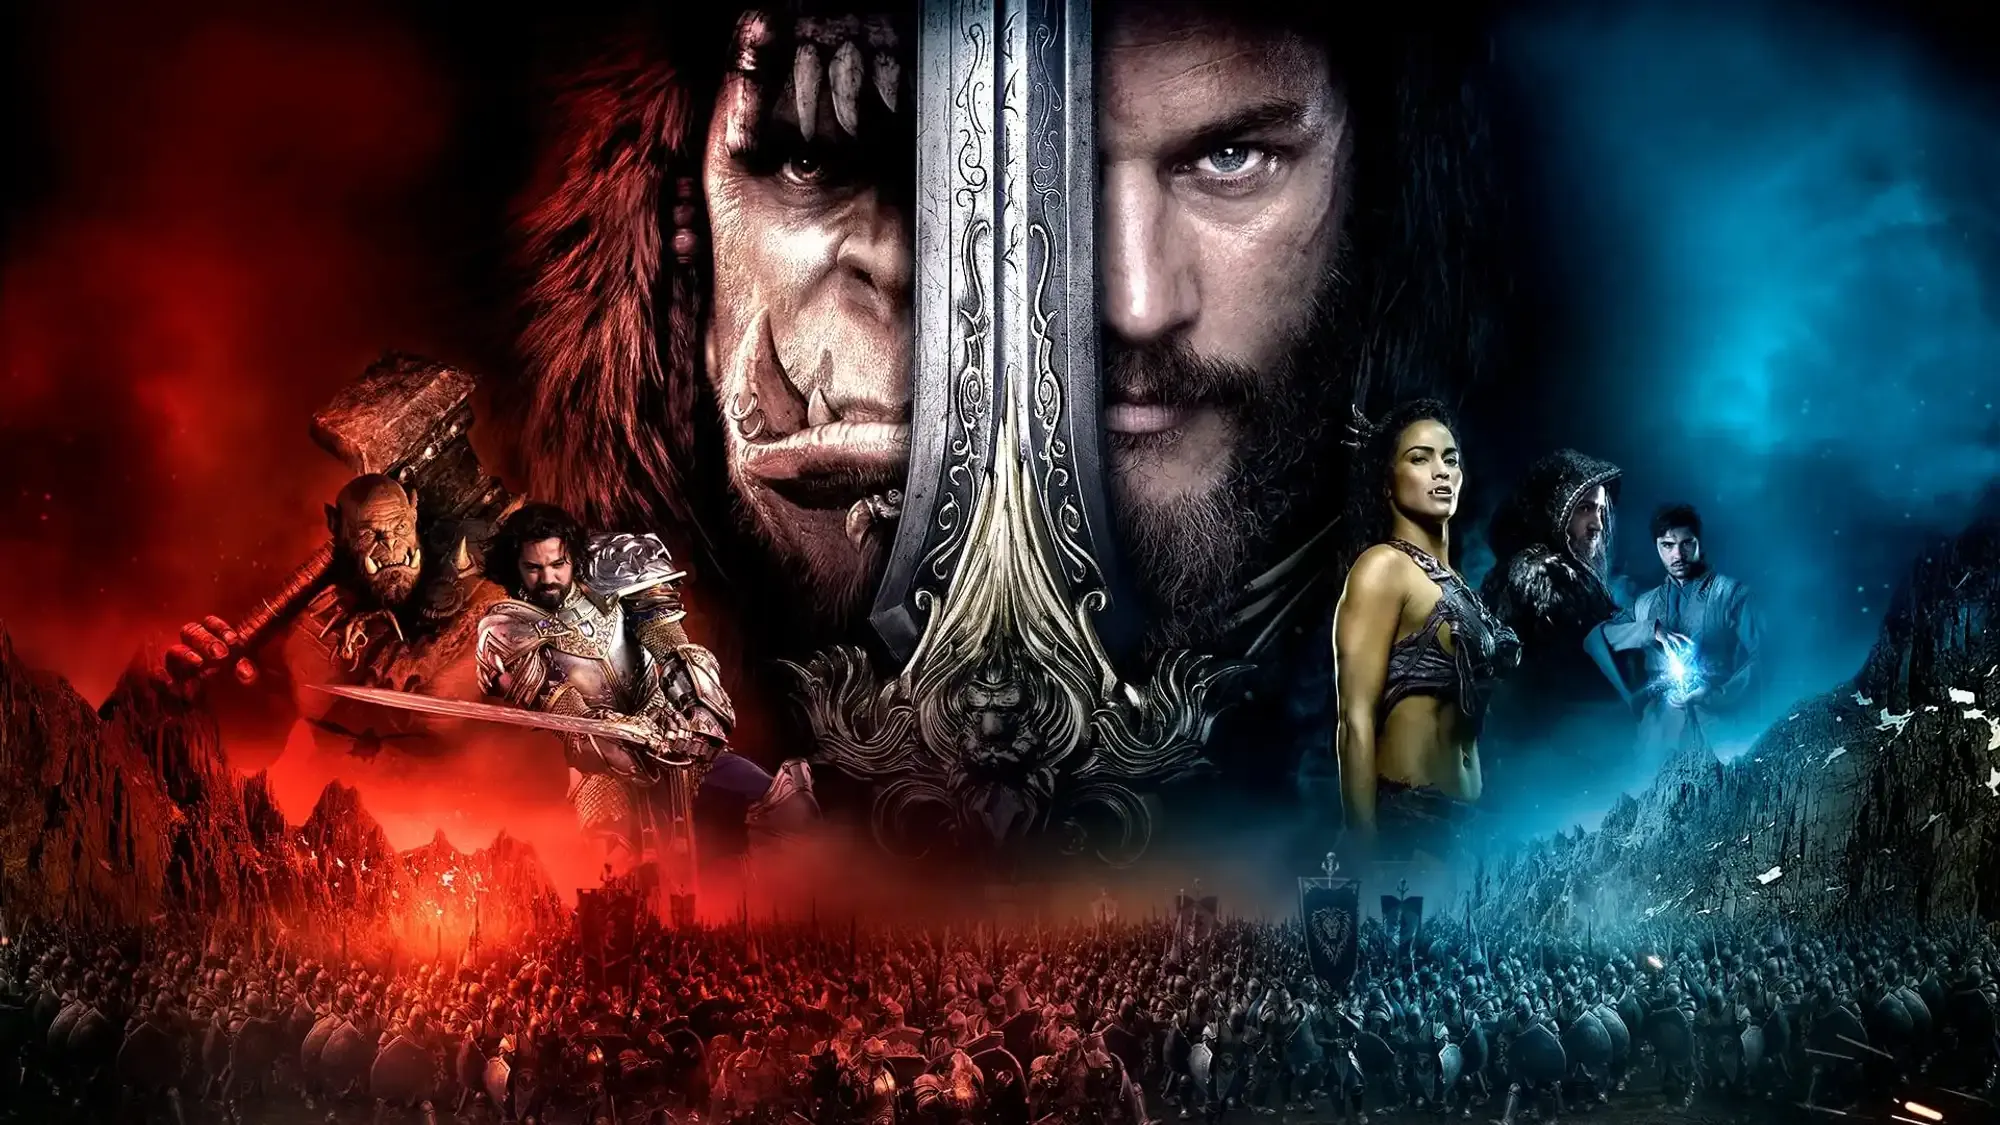 Warcraft movie review